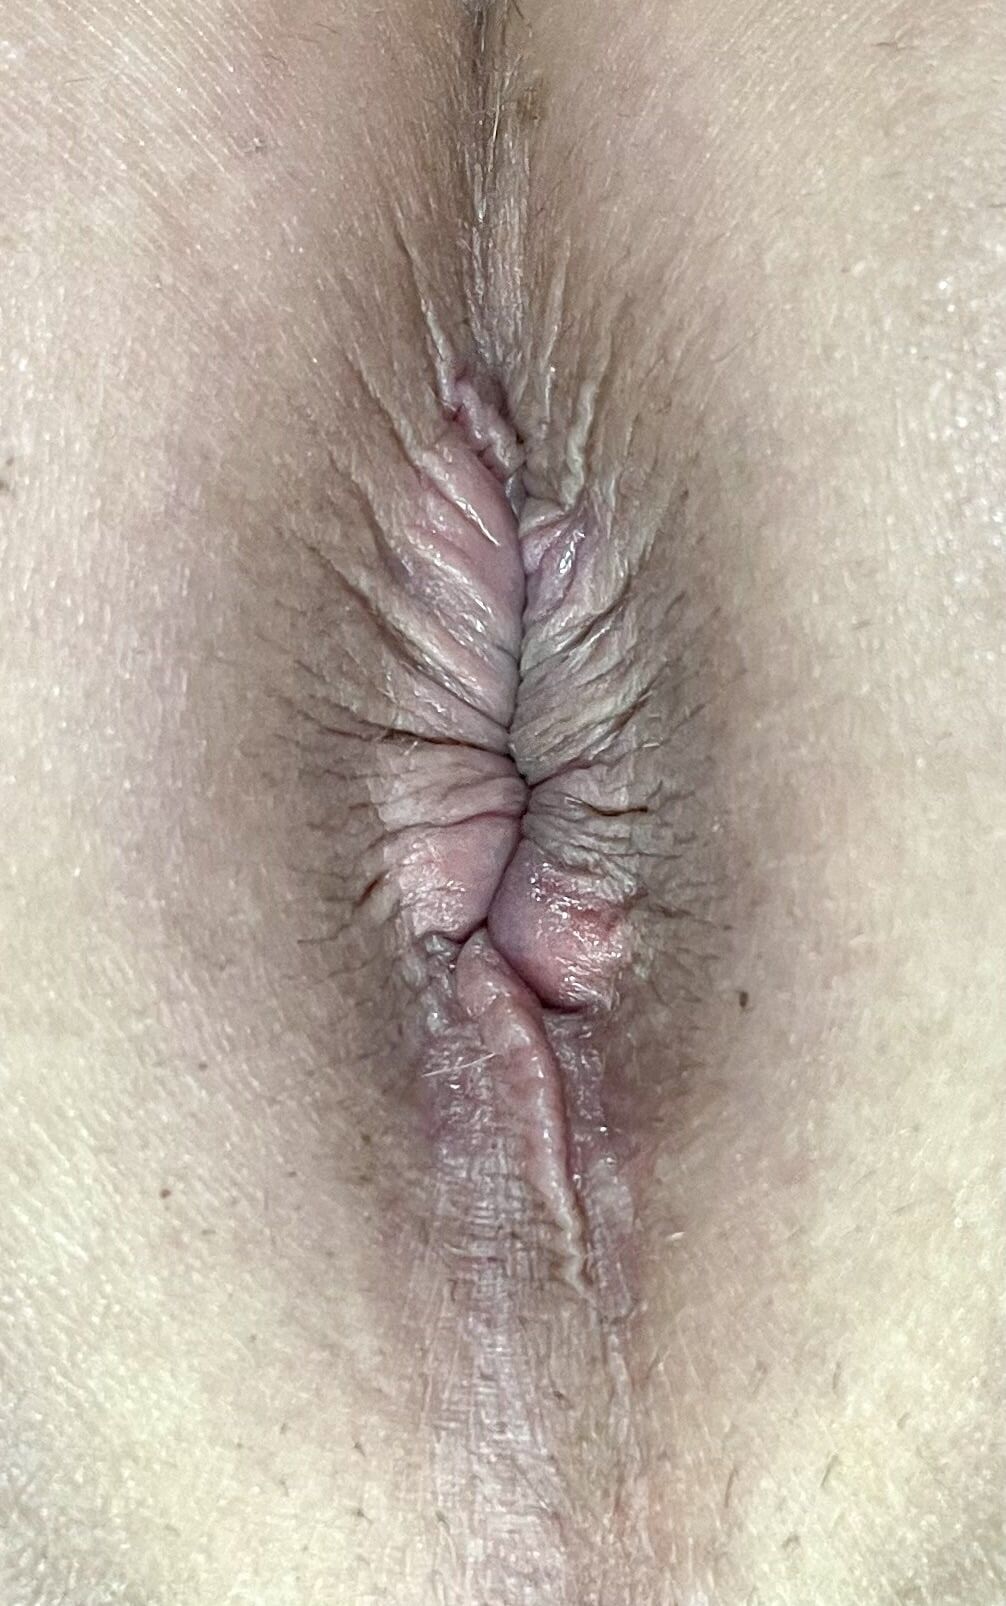 My gaping hole needs to be licked